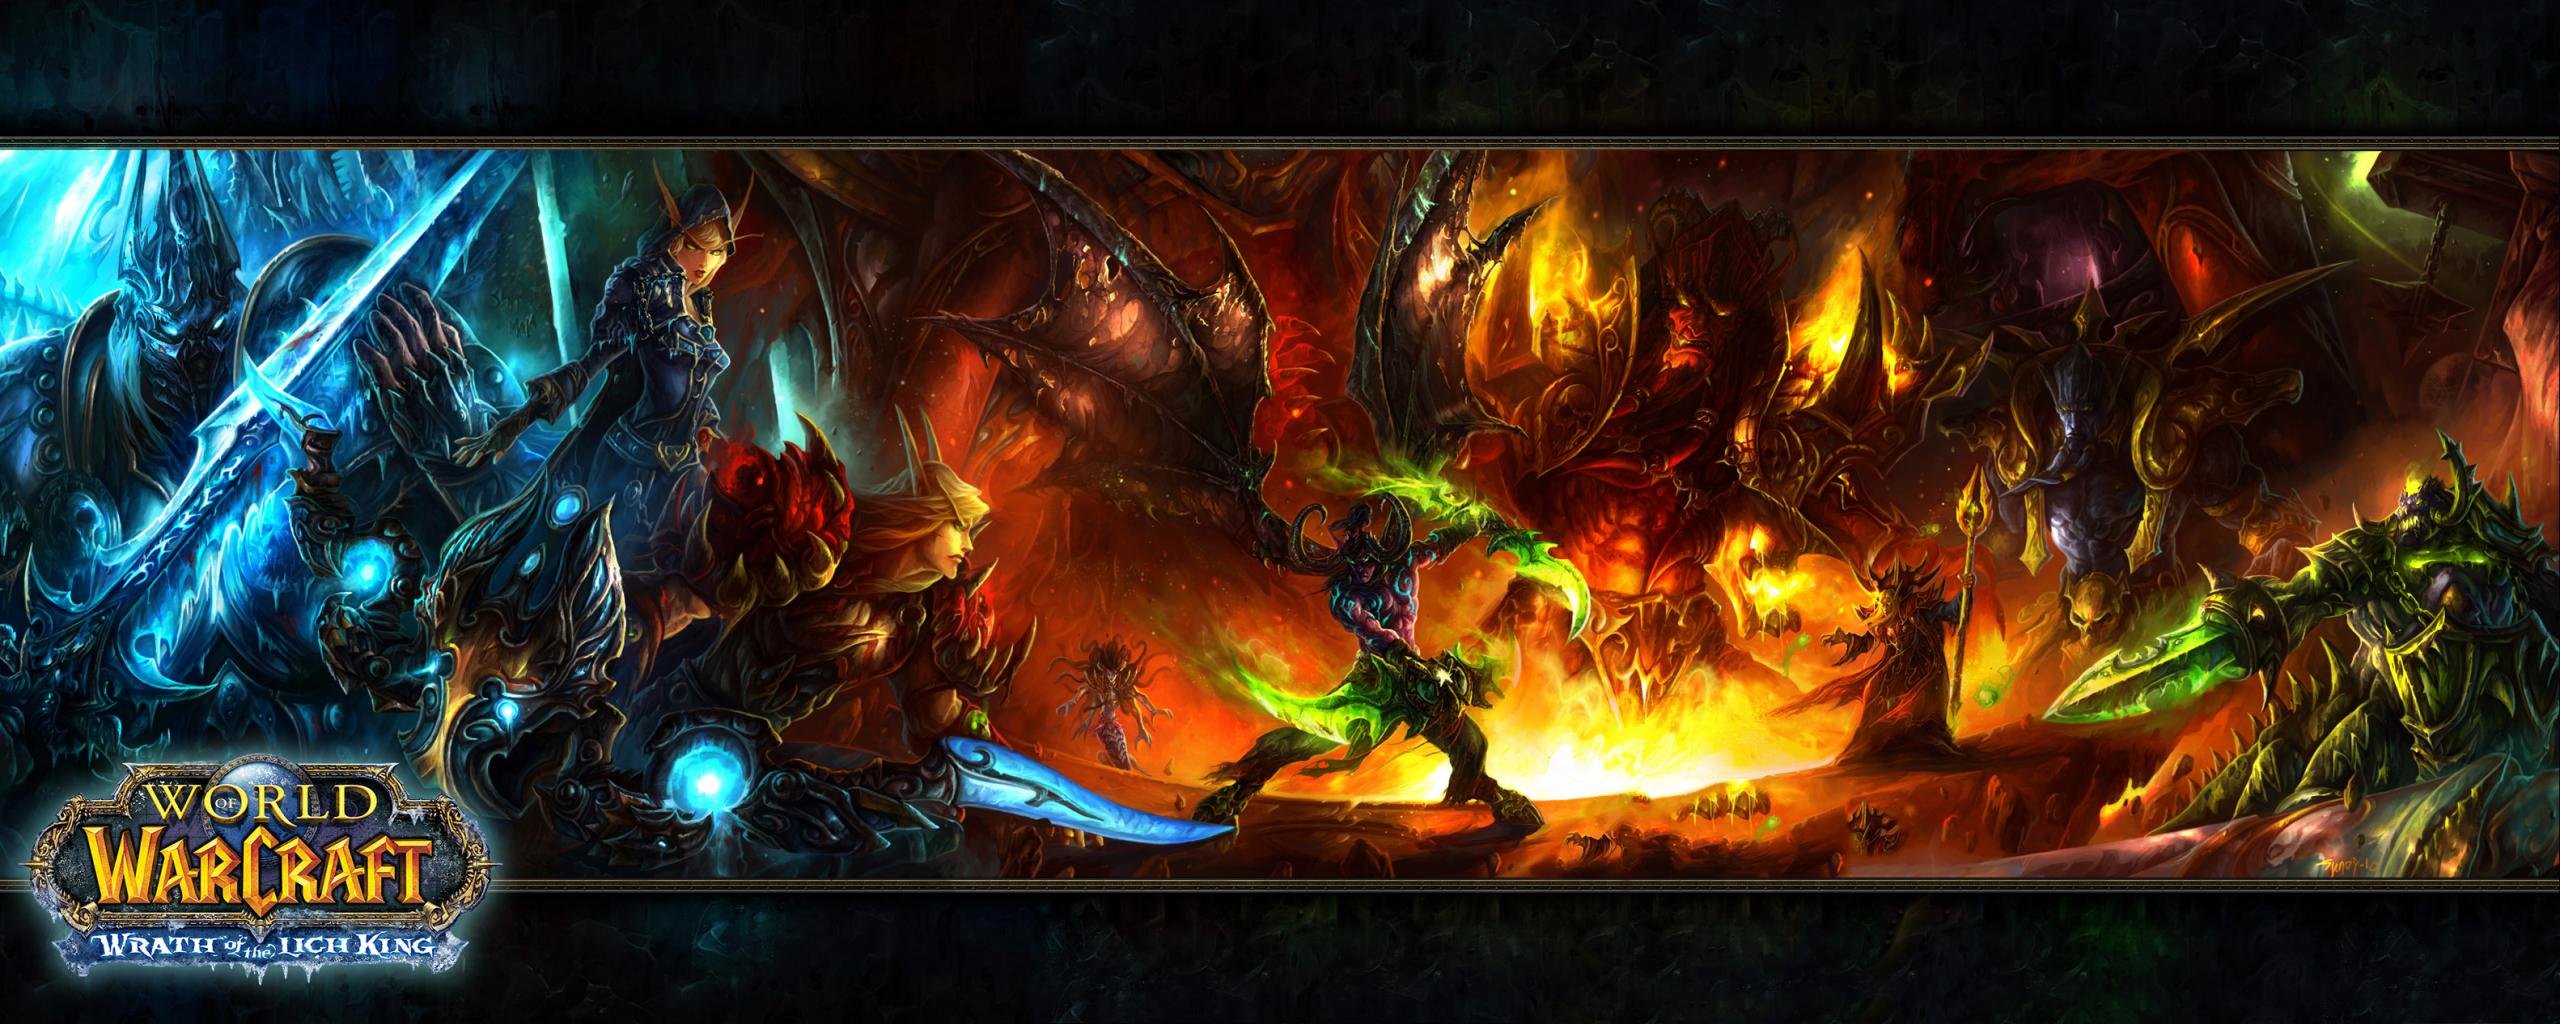 Dual Monitor World Of Warcraft Wow Wallpapers Hd Backgrounds